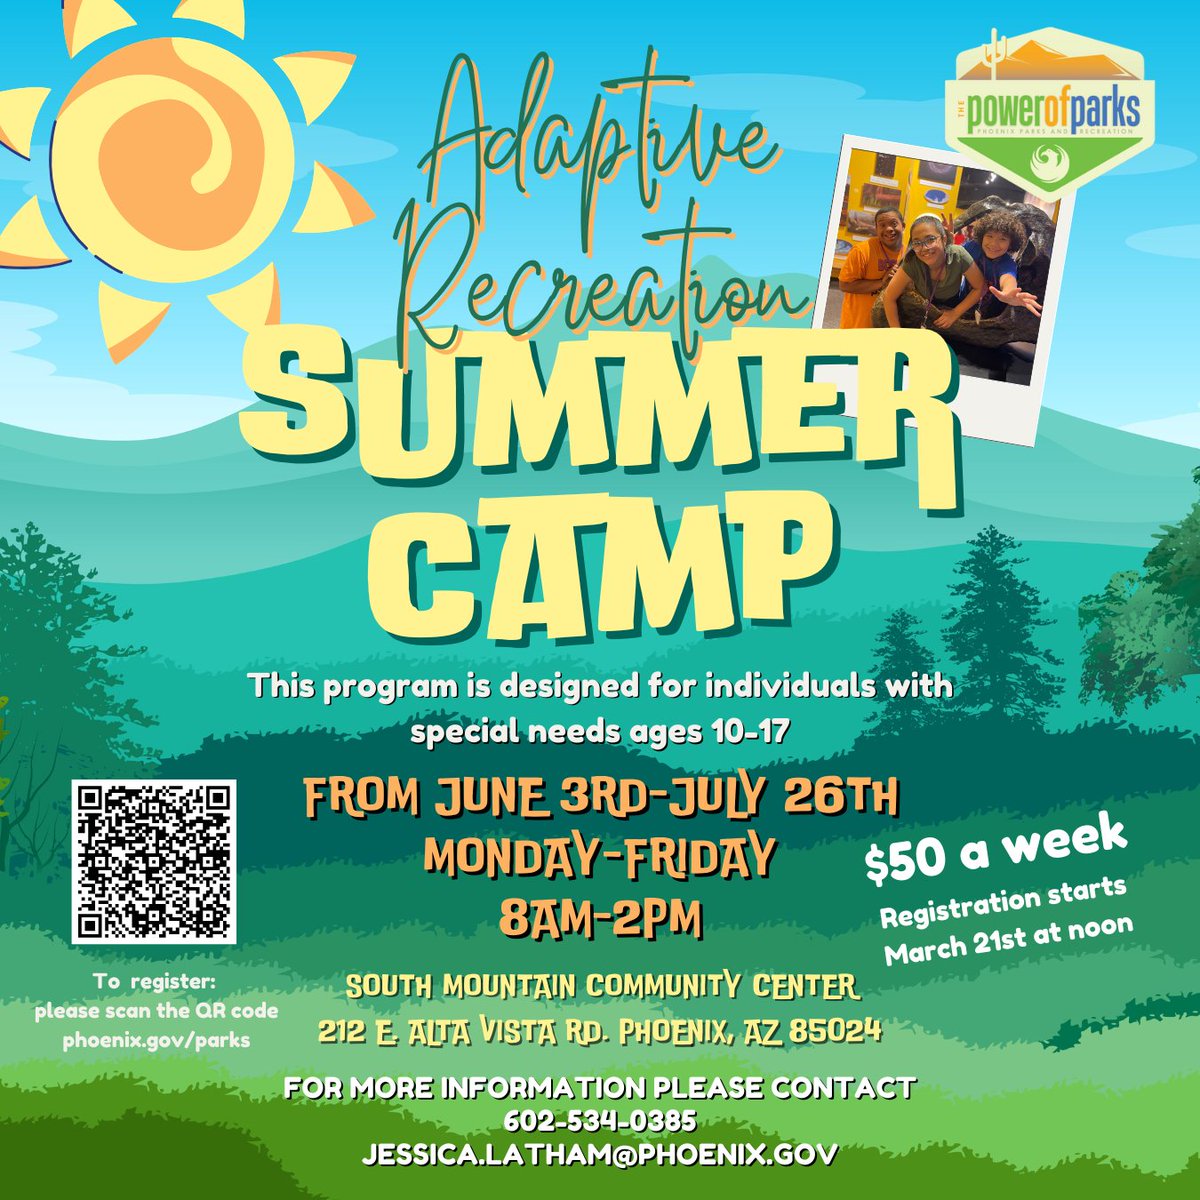 Excited to announce our Adaptive Recreation Summer Camp for special needs individuals aged 10-17! $50 a week. Let's make this summer unforgettable! 💫 📍 South Mountain Community Center, 212 E Alta Vista Rd. Phoenix AZ 85024 🗓️ June 3rd - July 26th, Monday - Friday, 8am - 2pm